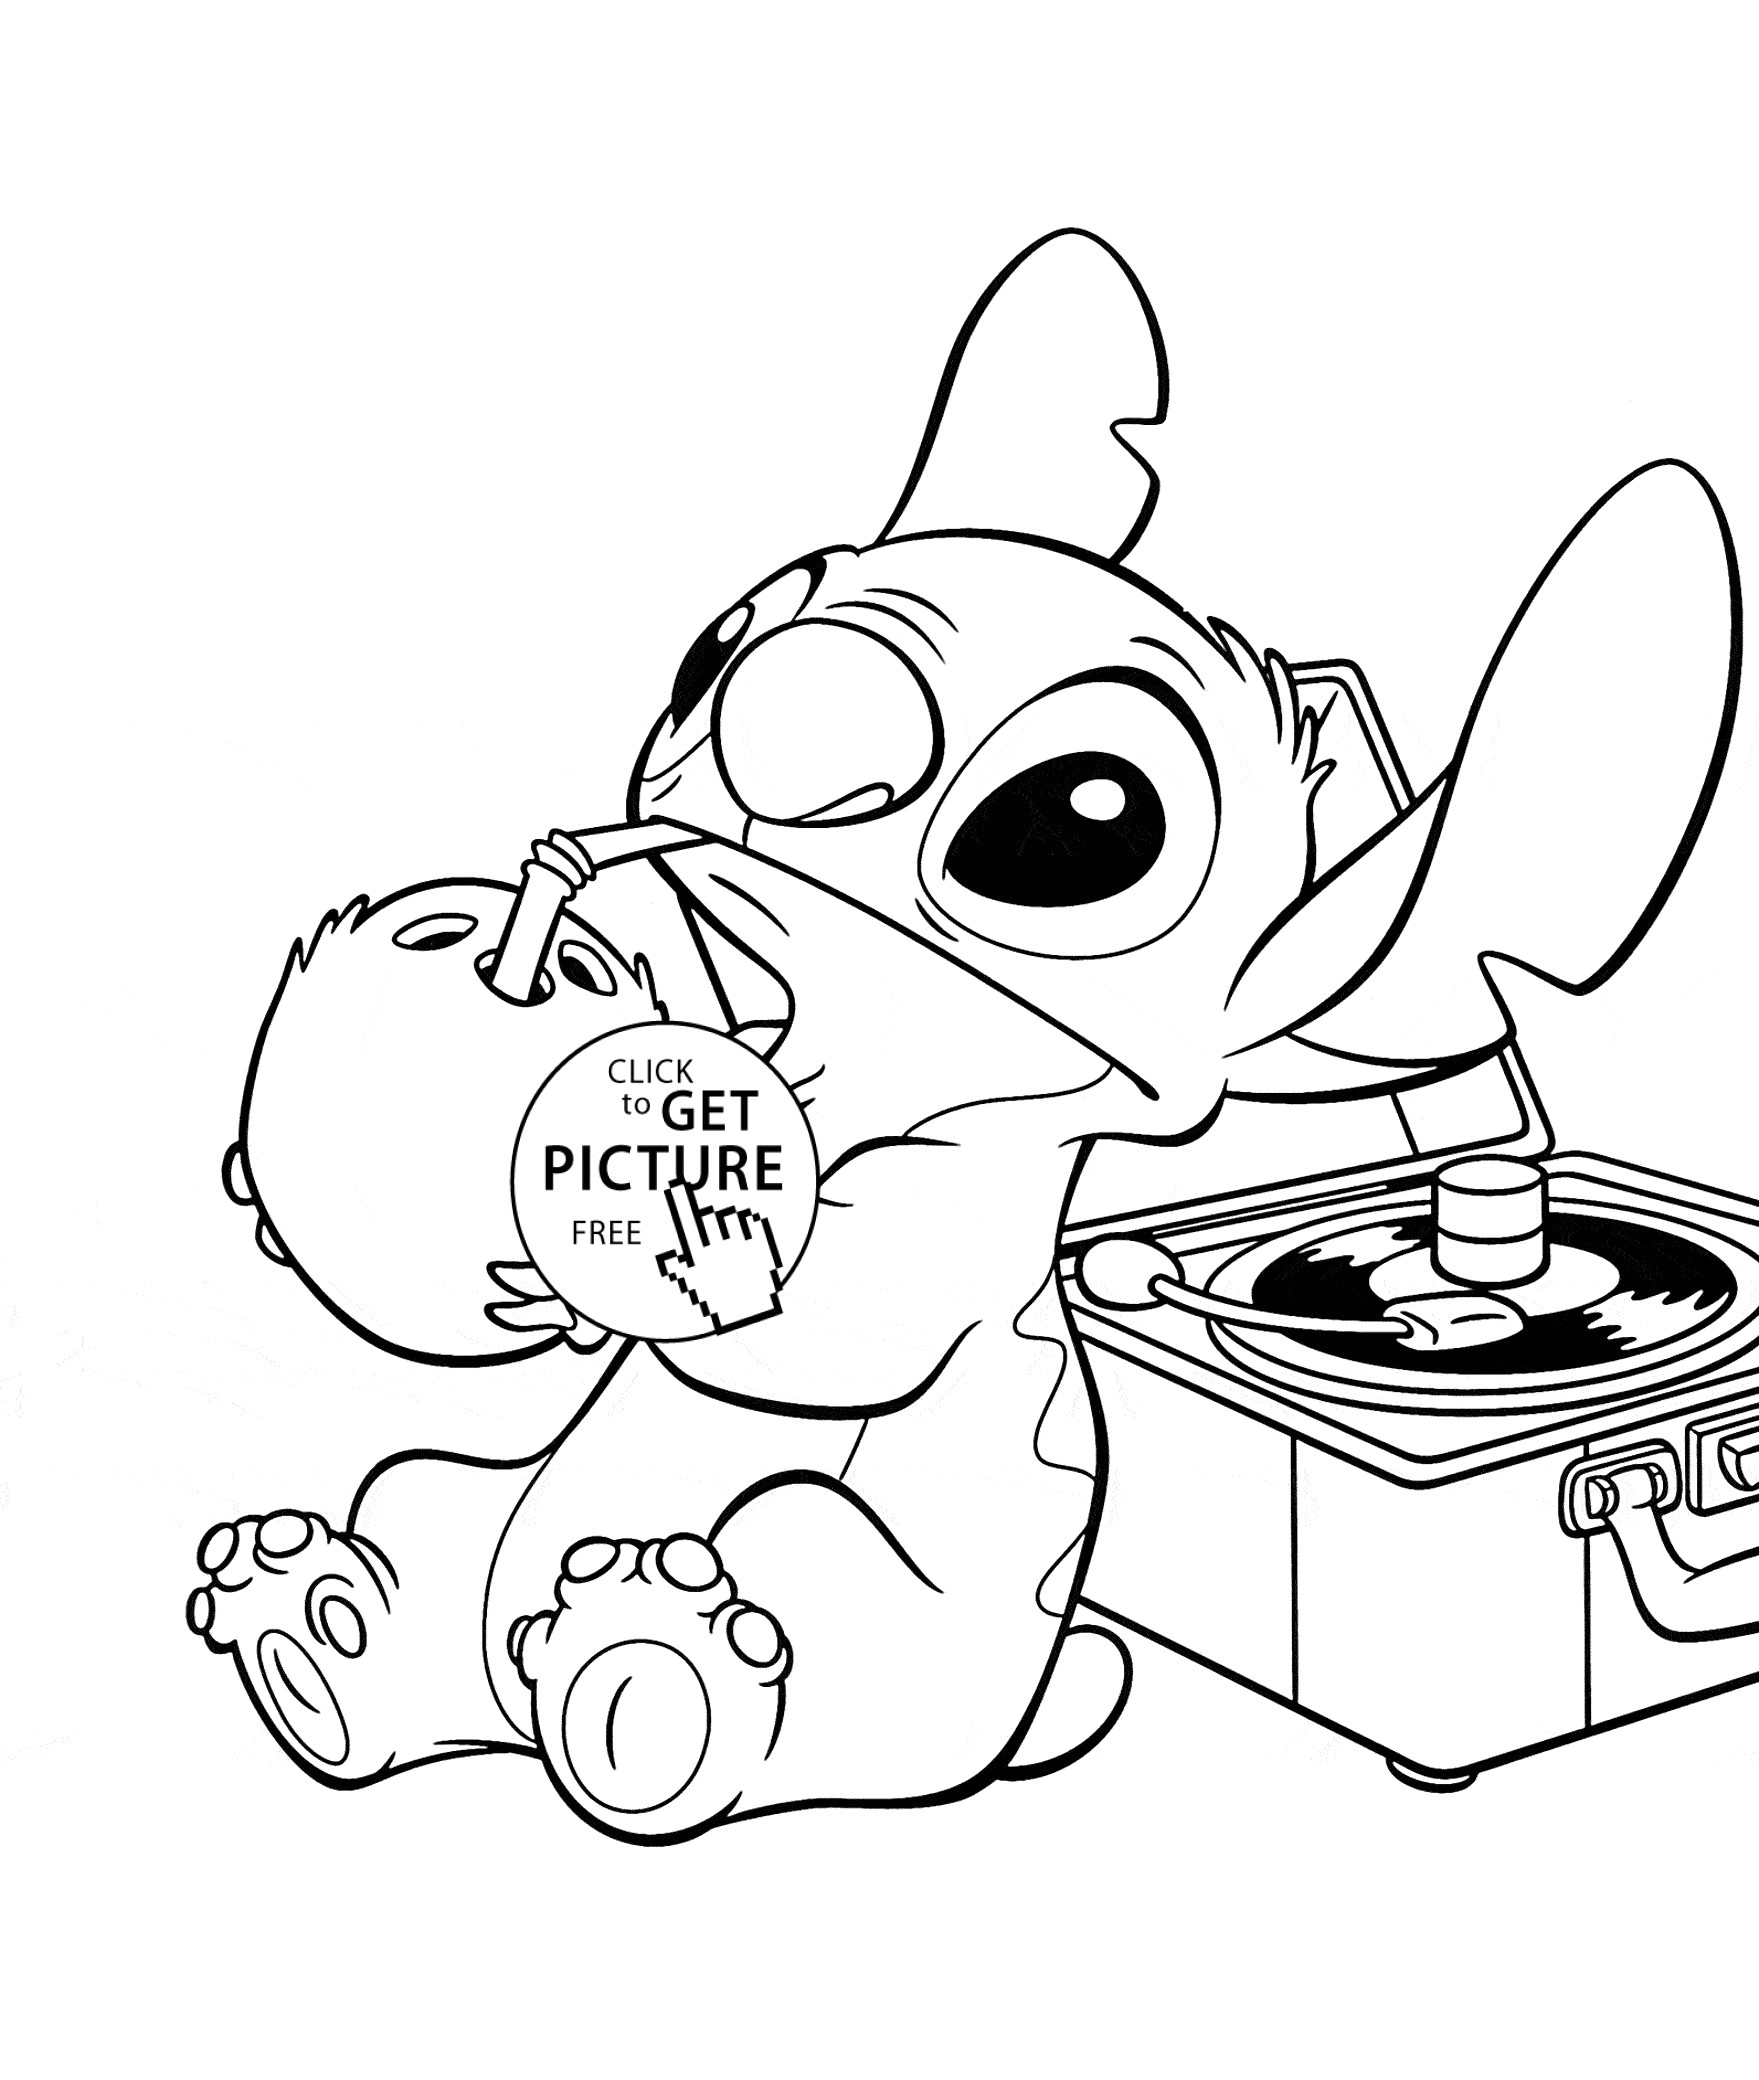 Lilo And Stitch Coloring Pages Lilo And Stitch Coloring Pages For Kids